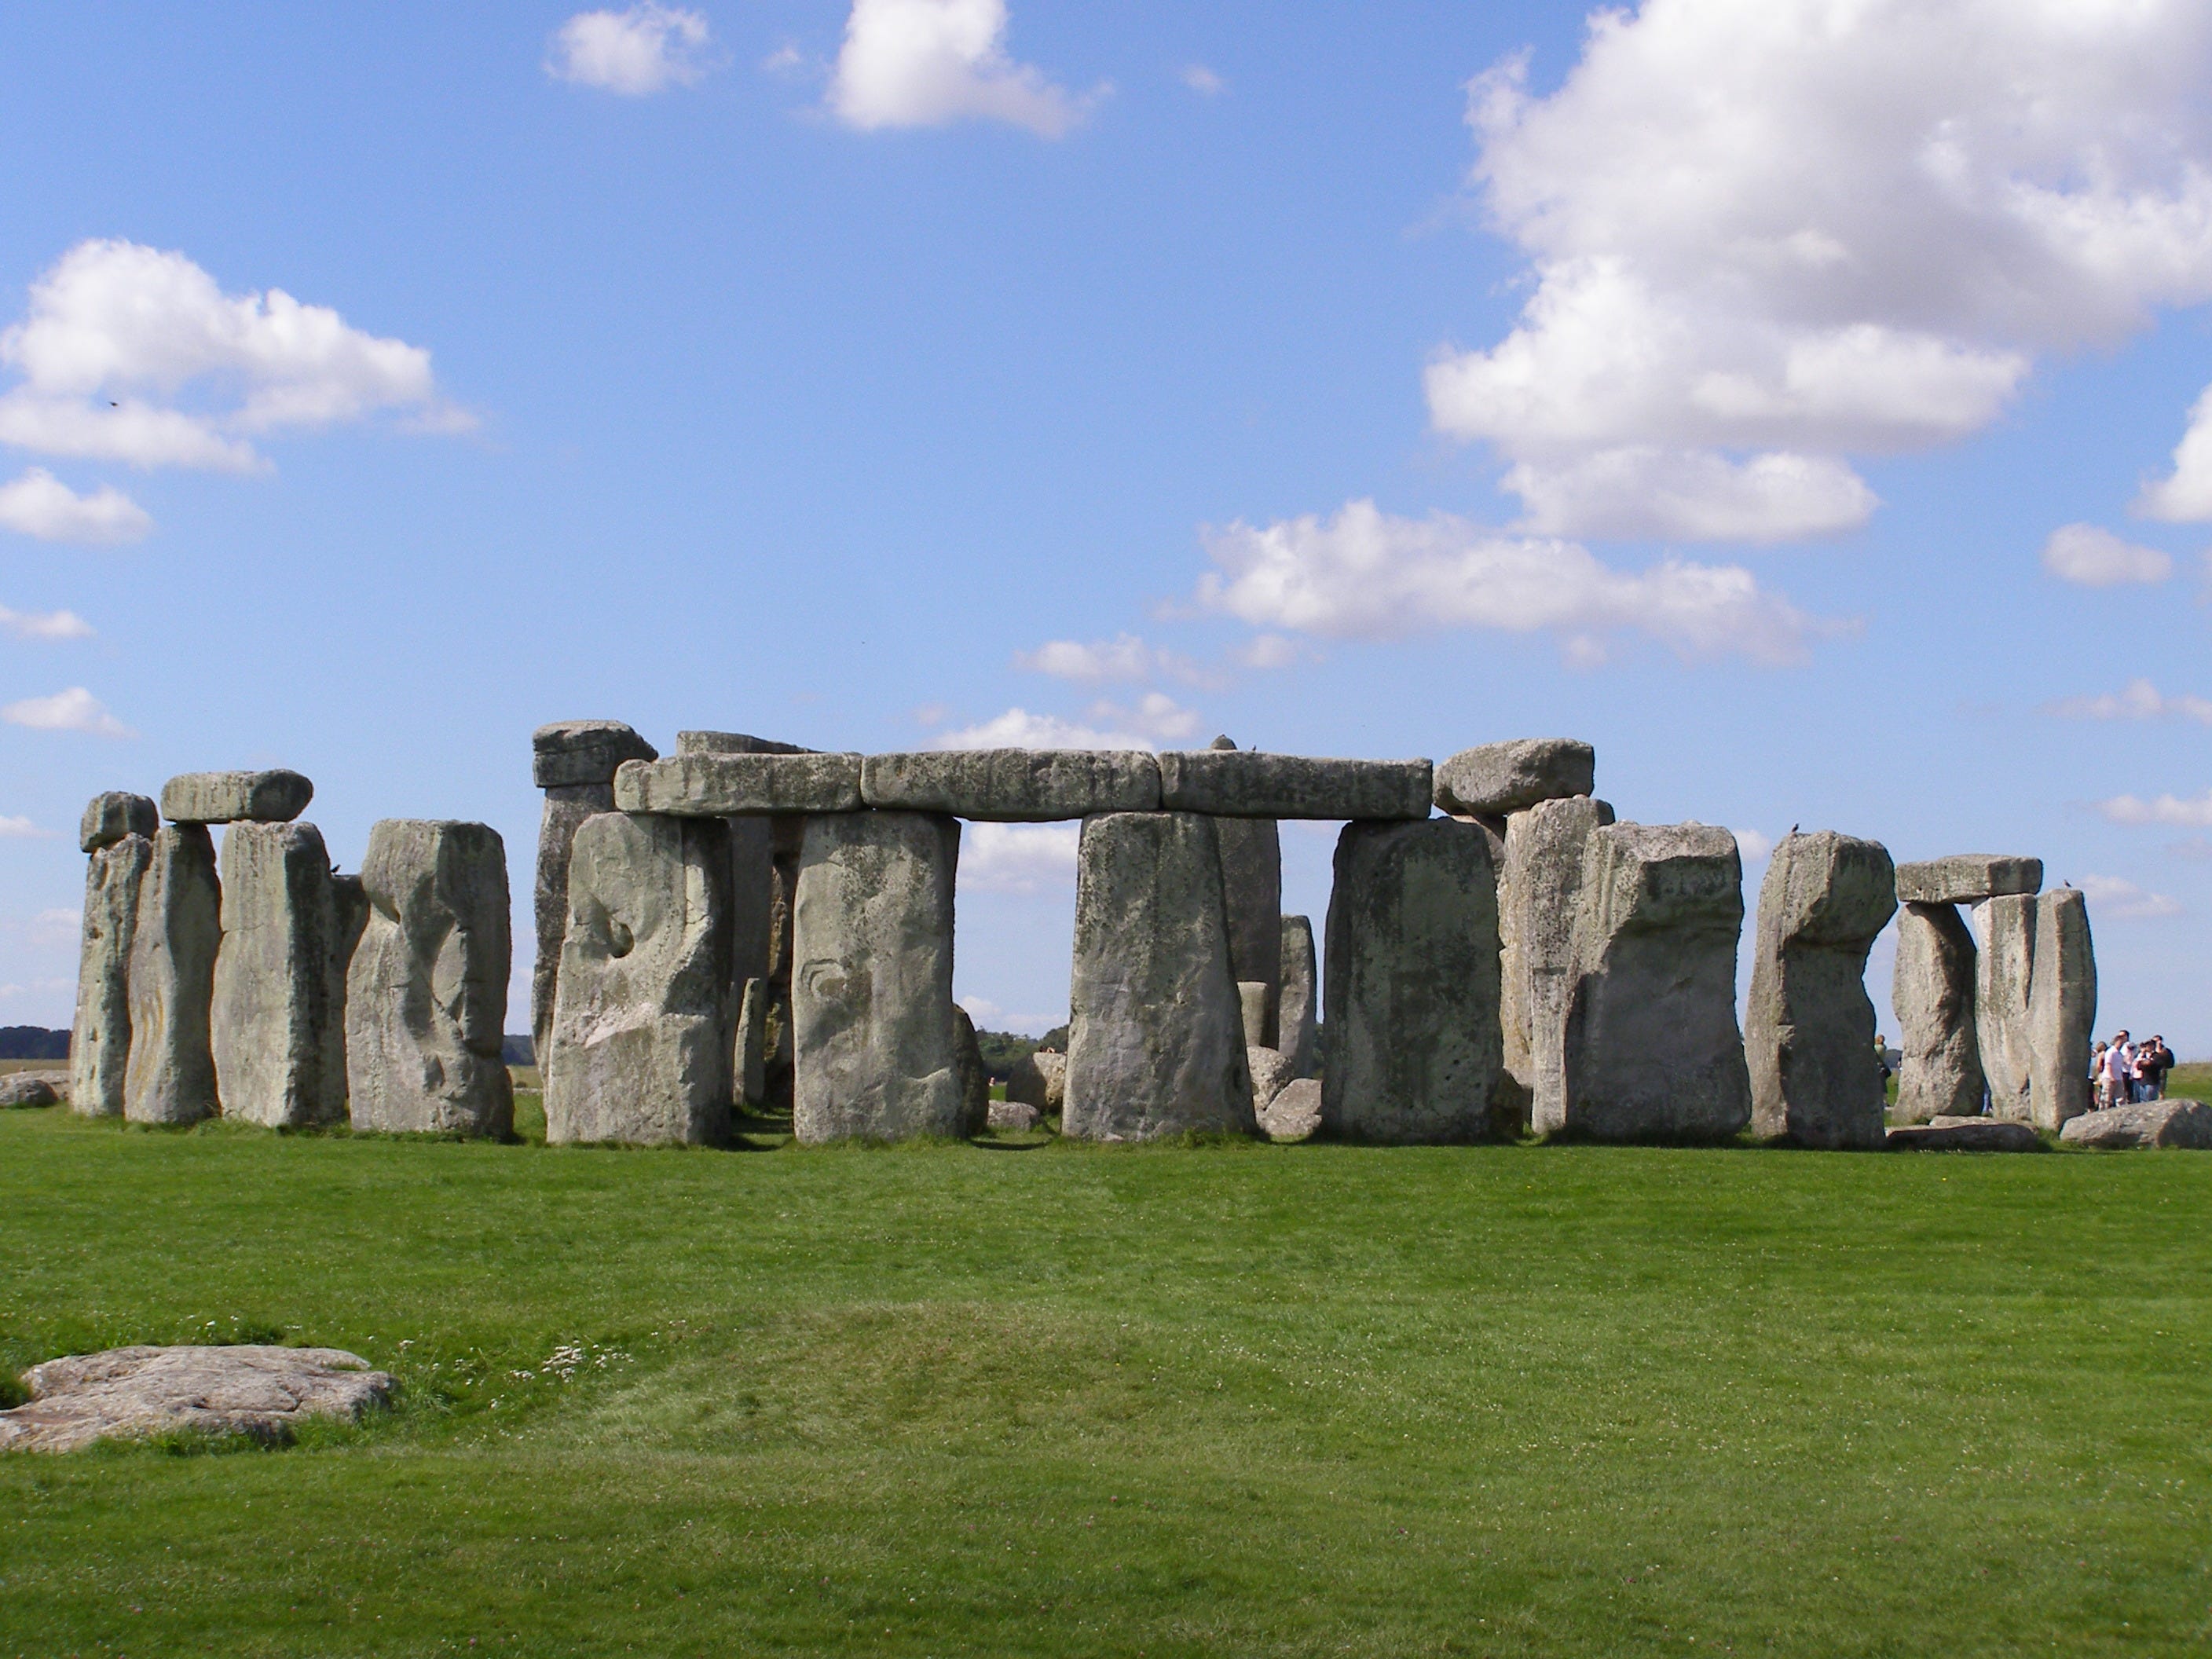 View of Stonehenge with stones delimiting space